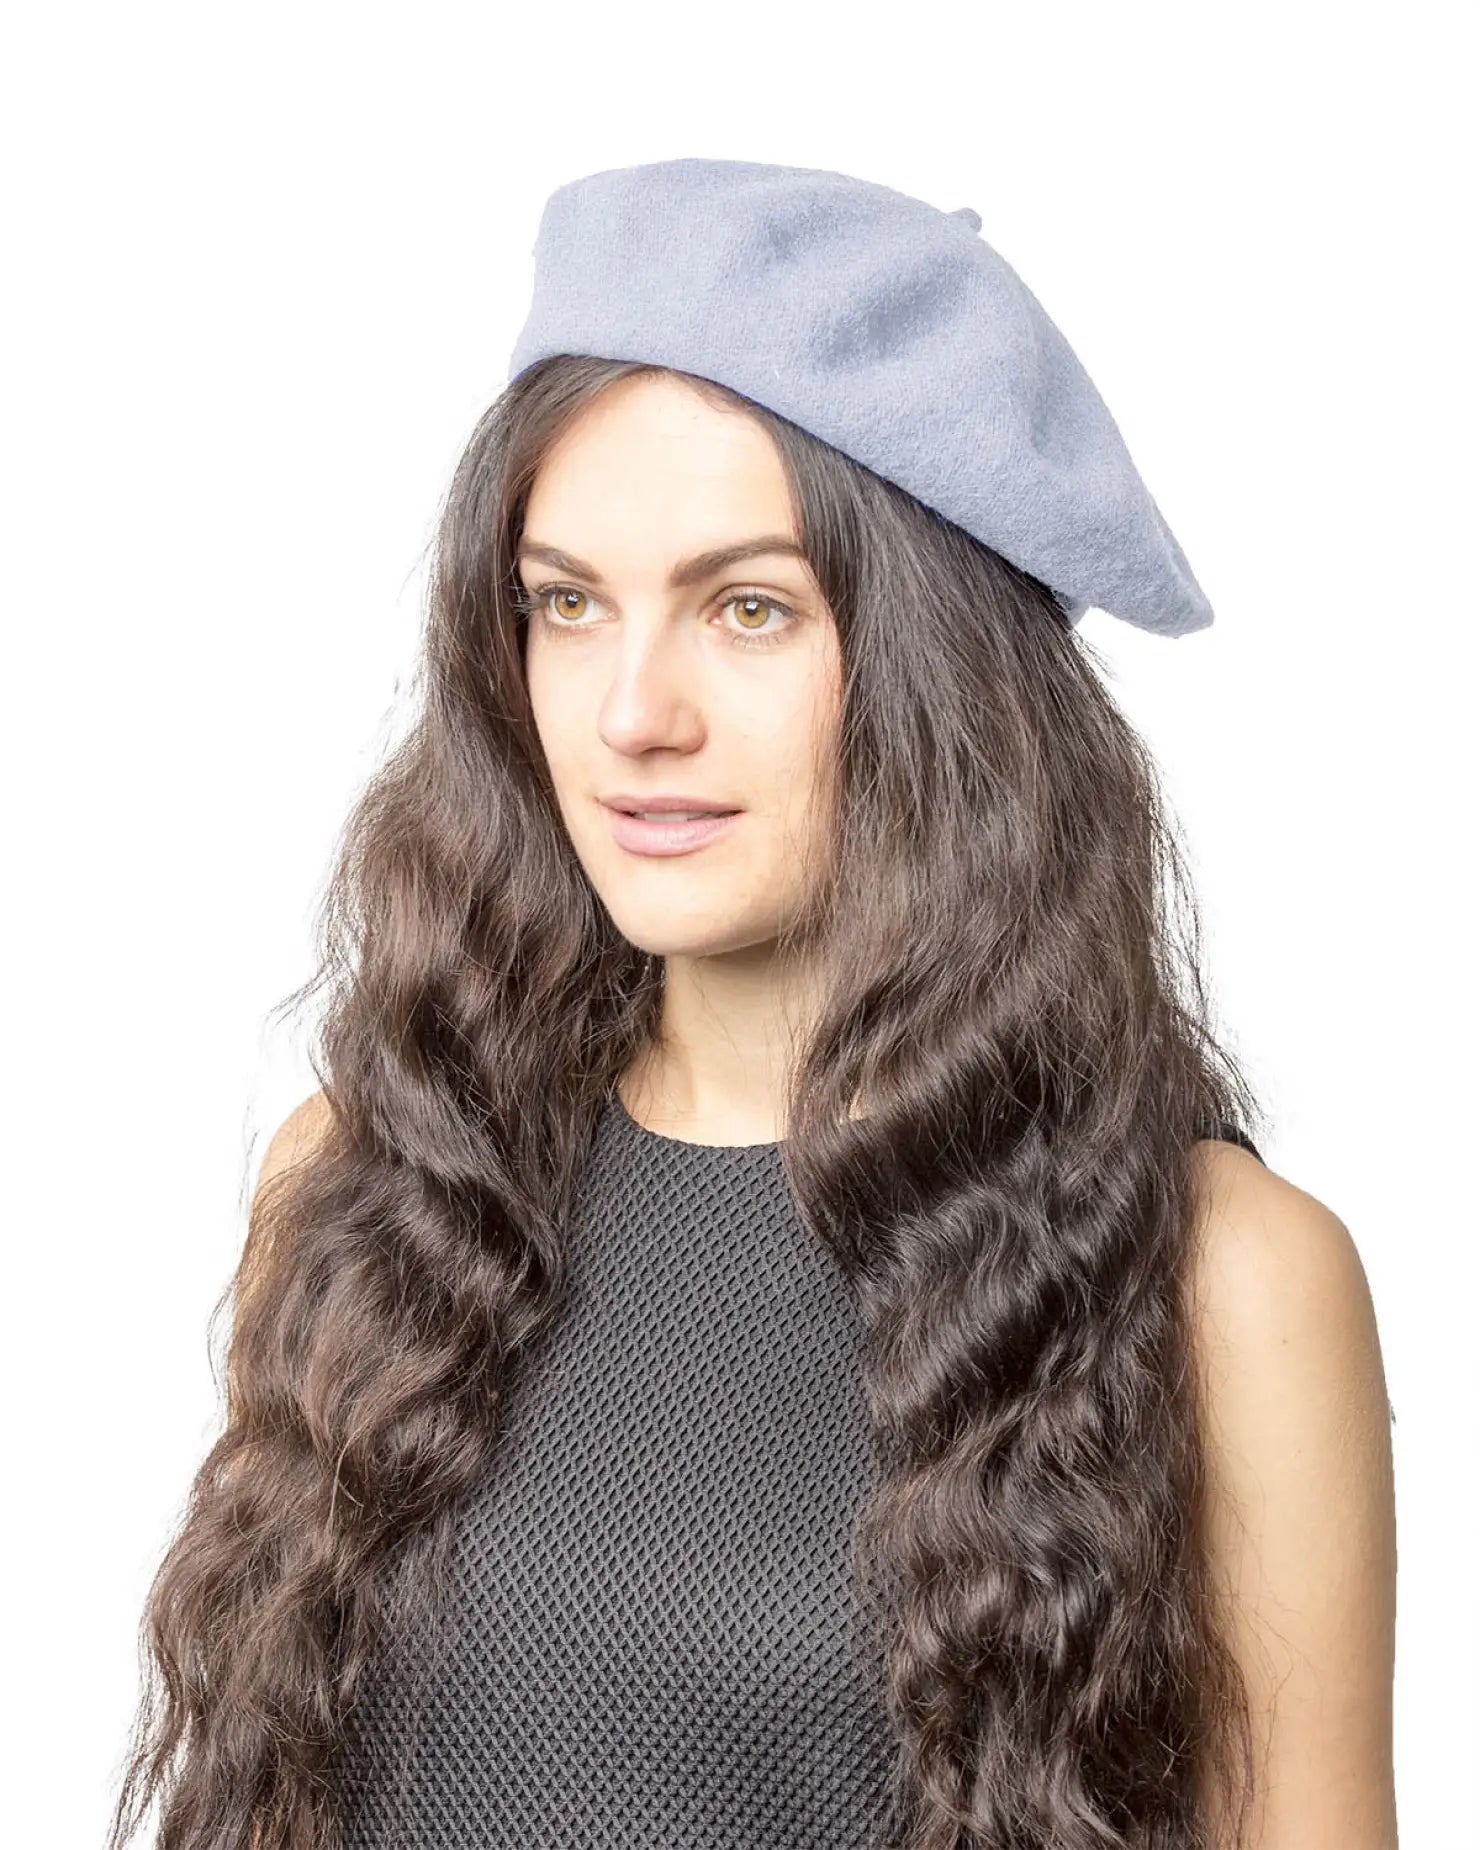 French wool beret in elegant blue worn by woman with long brown hair